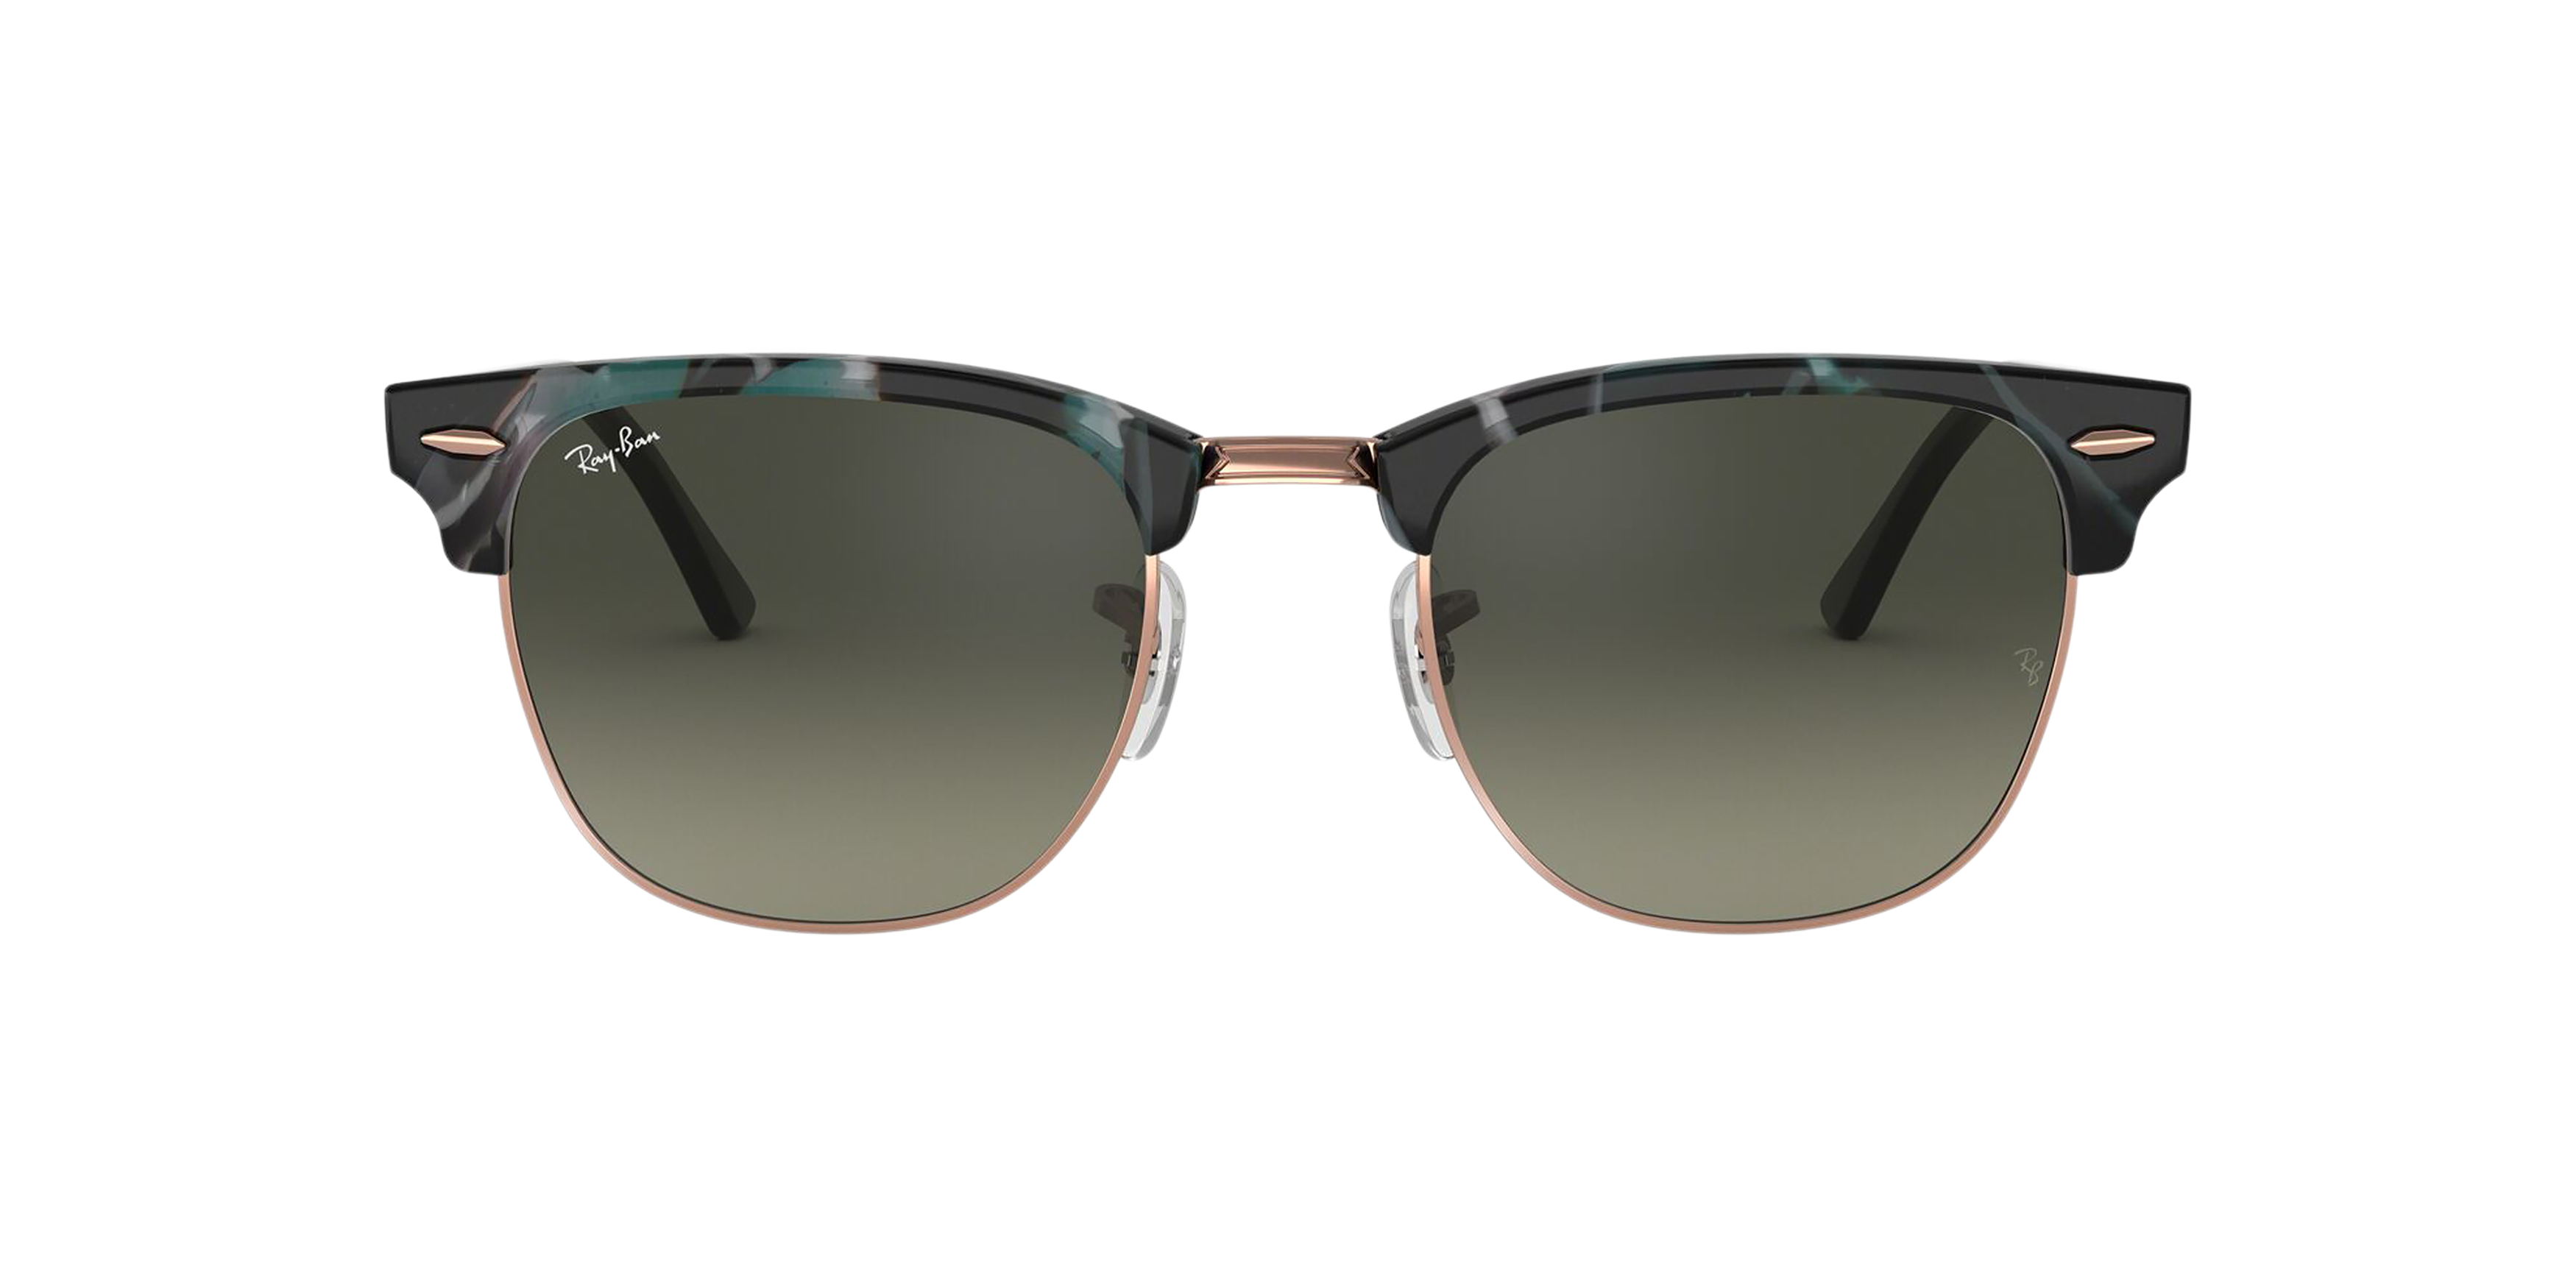 [products.image.front] Ray-Ban Clubmaster Fleck RB3016 125571